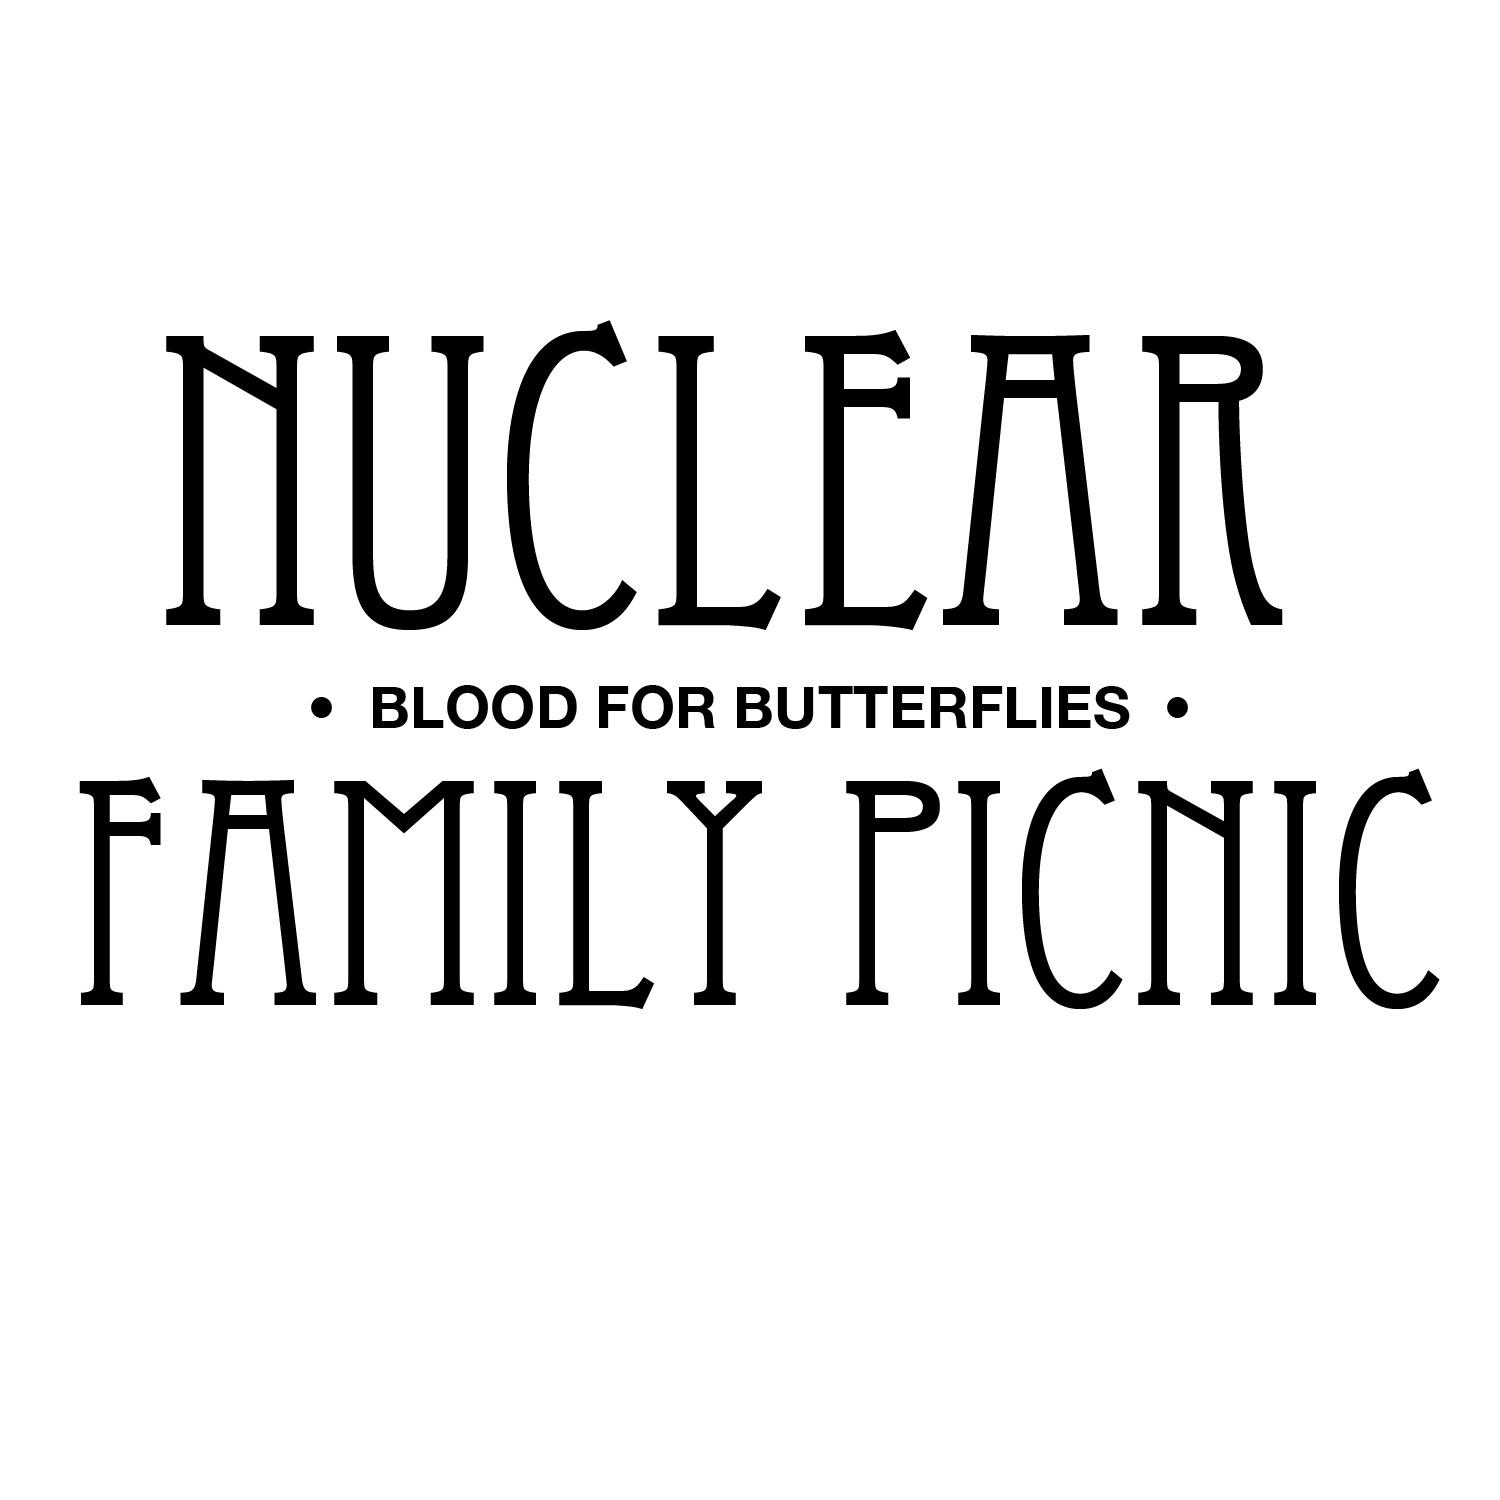 Nuclear Family Picnic Artist Commentary